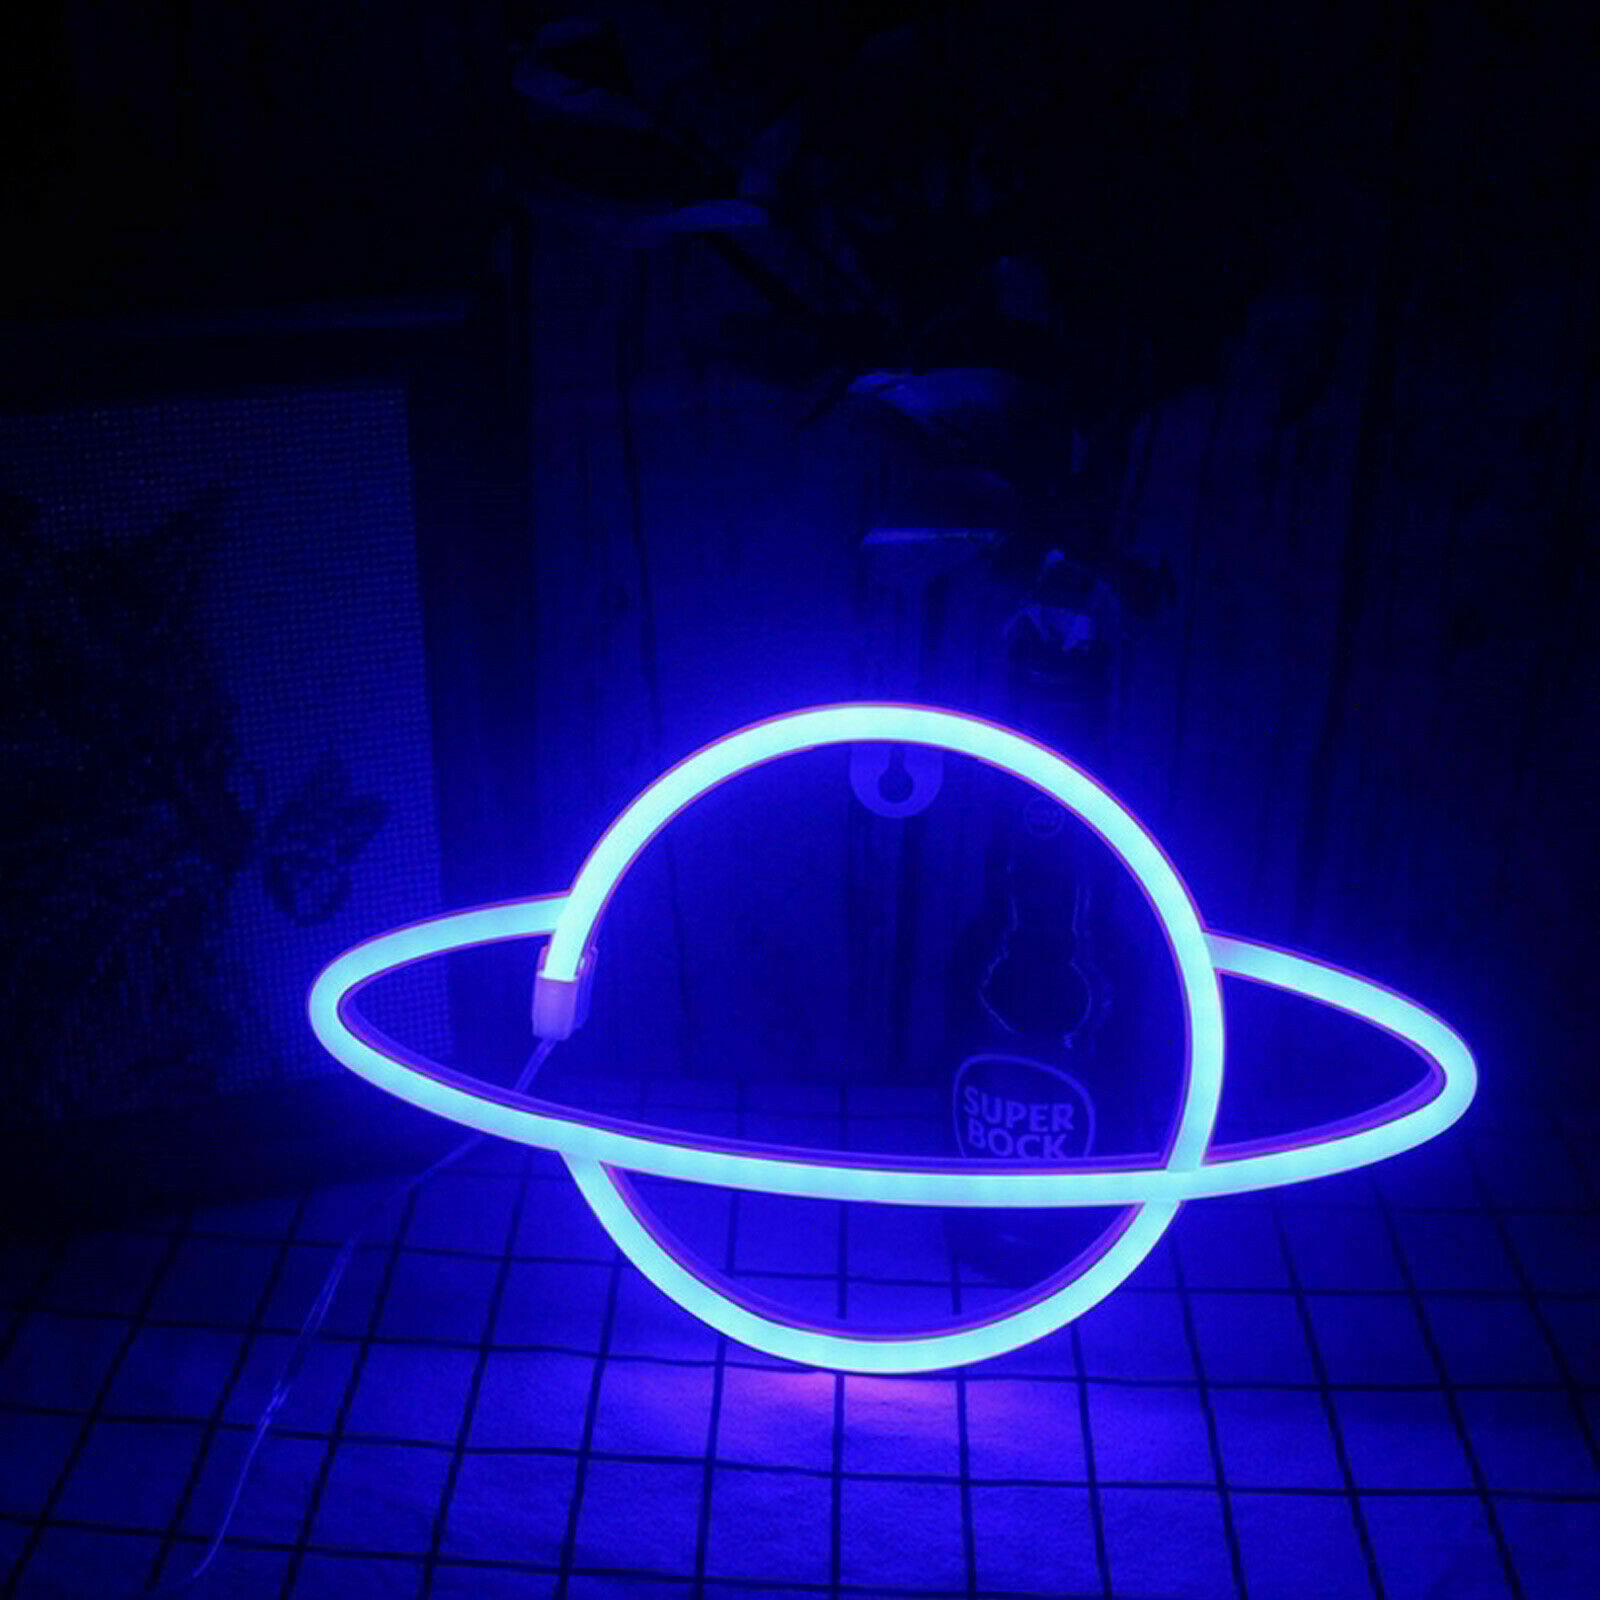 42 OR 25 CM  LARGE DECOR LED NEON INDOOR NIGHT LIGHT AA BATTERY OPERATED 